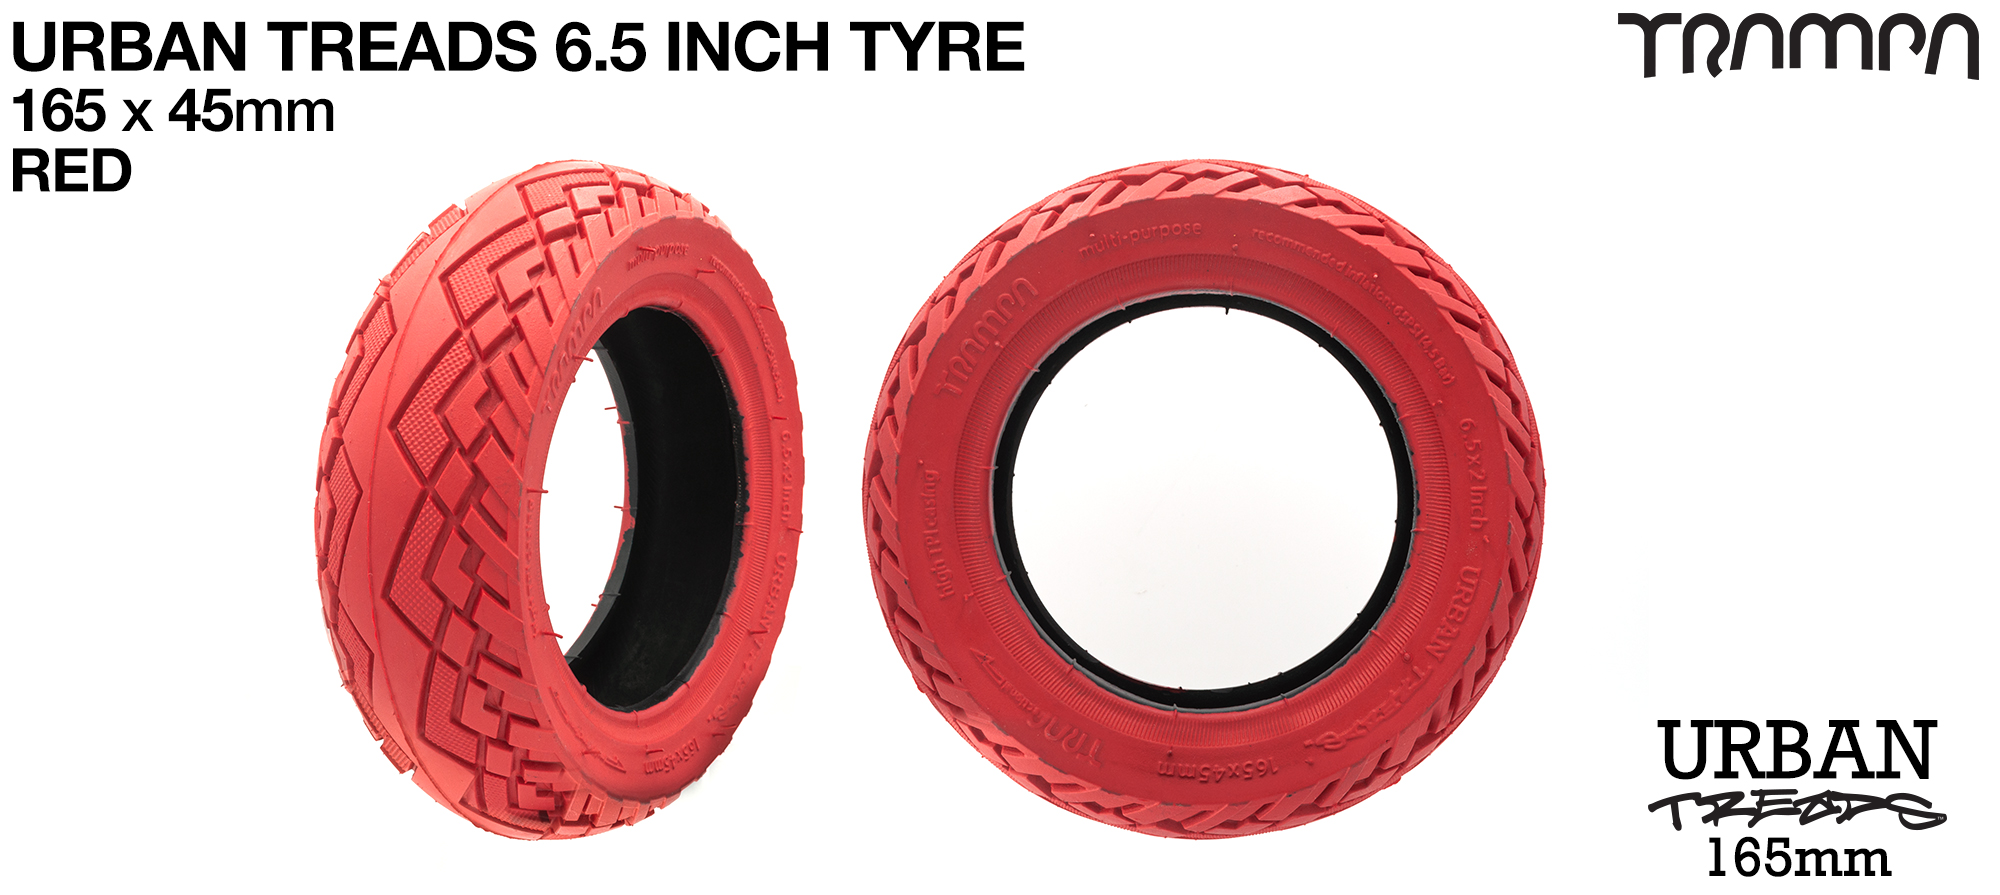 URBAN TREADS 6 Inch Tyre measures 3.75x 1.75x 6.5 Inch or 165x 45mm with 3.75 inch Rim & fits all 3.75 inch Hubs